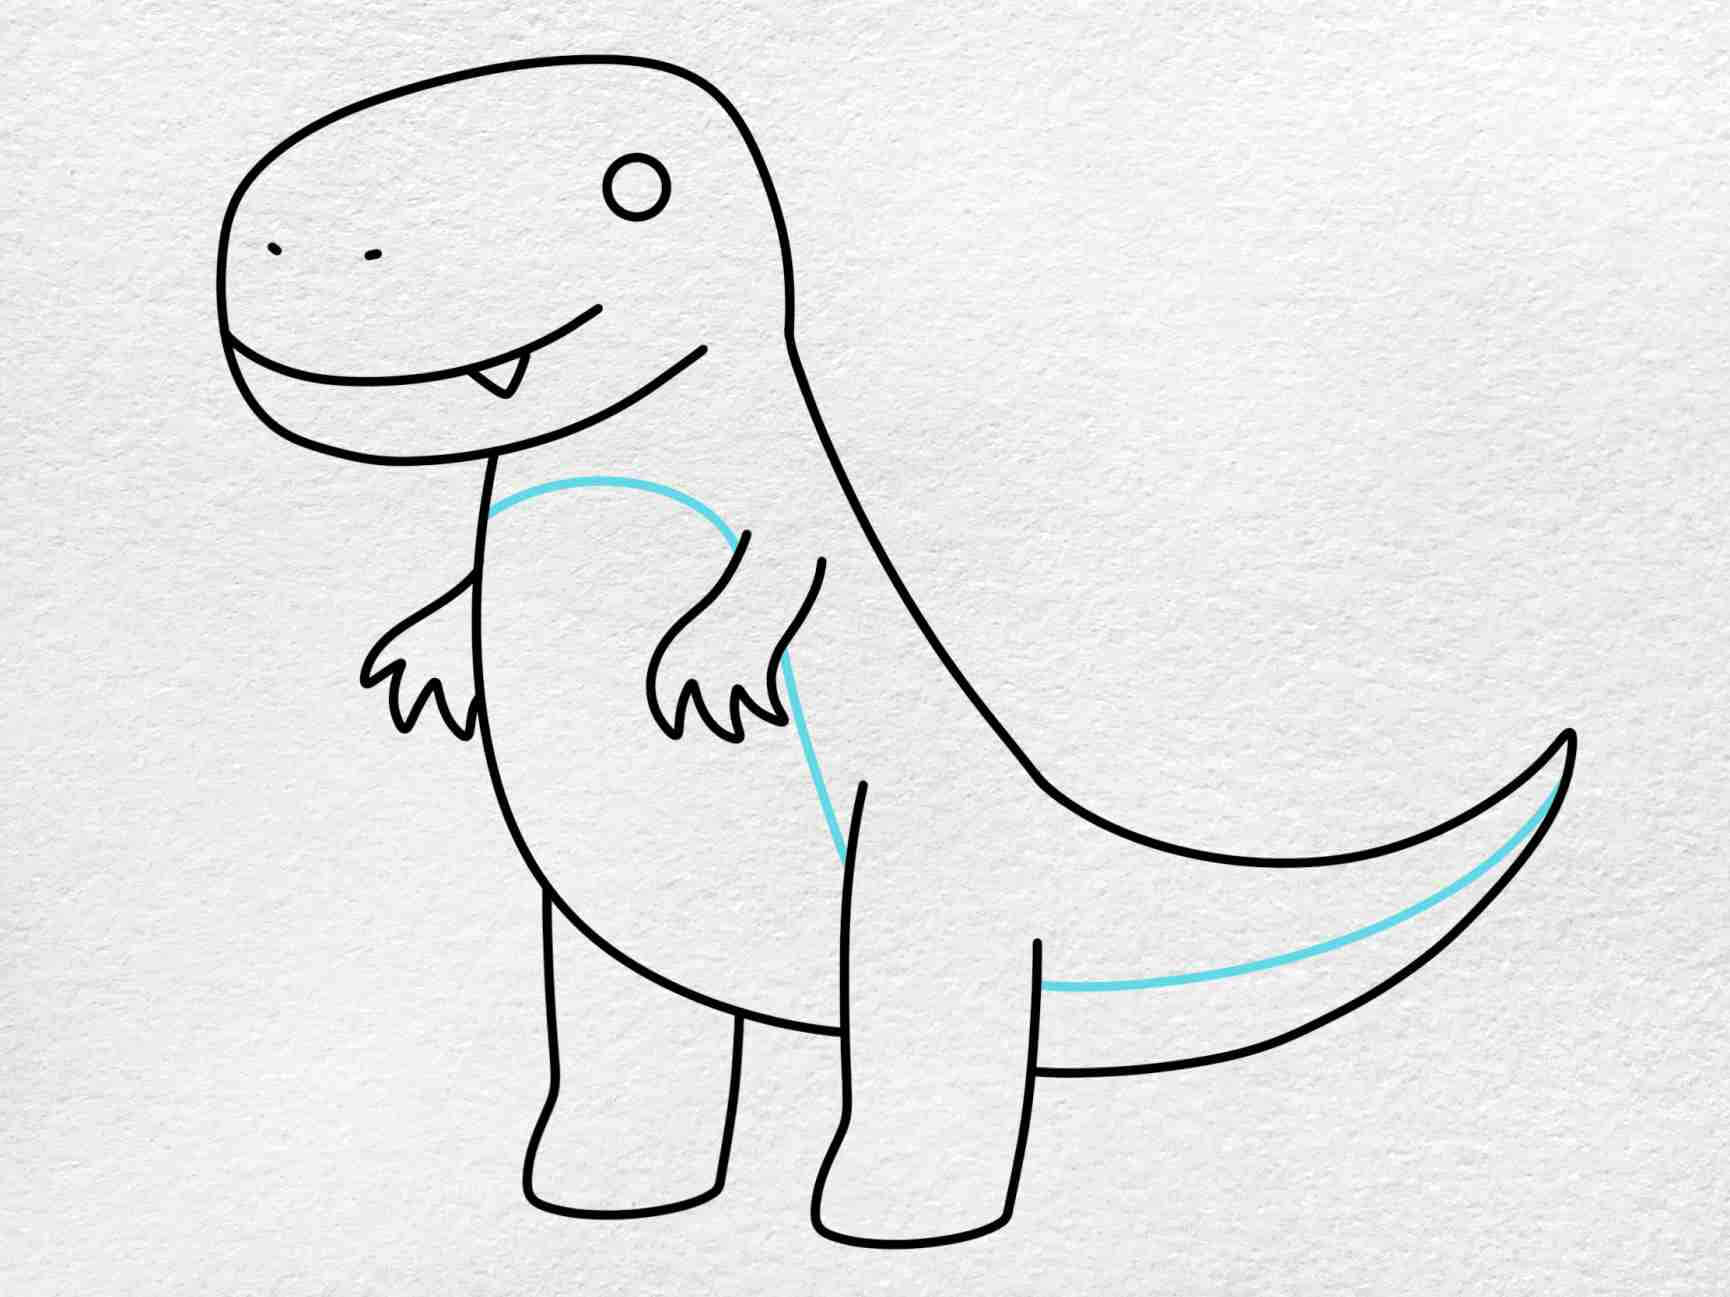 Cute Cartoon Dinosaurs Coloring Pages And Crafts Outline Sketch Drawing  Vector PNG Picture And Clipart Image For Free Download - Lovepik | 380530385